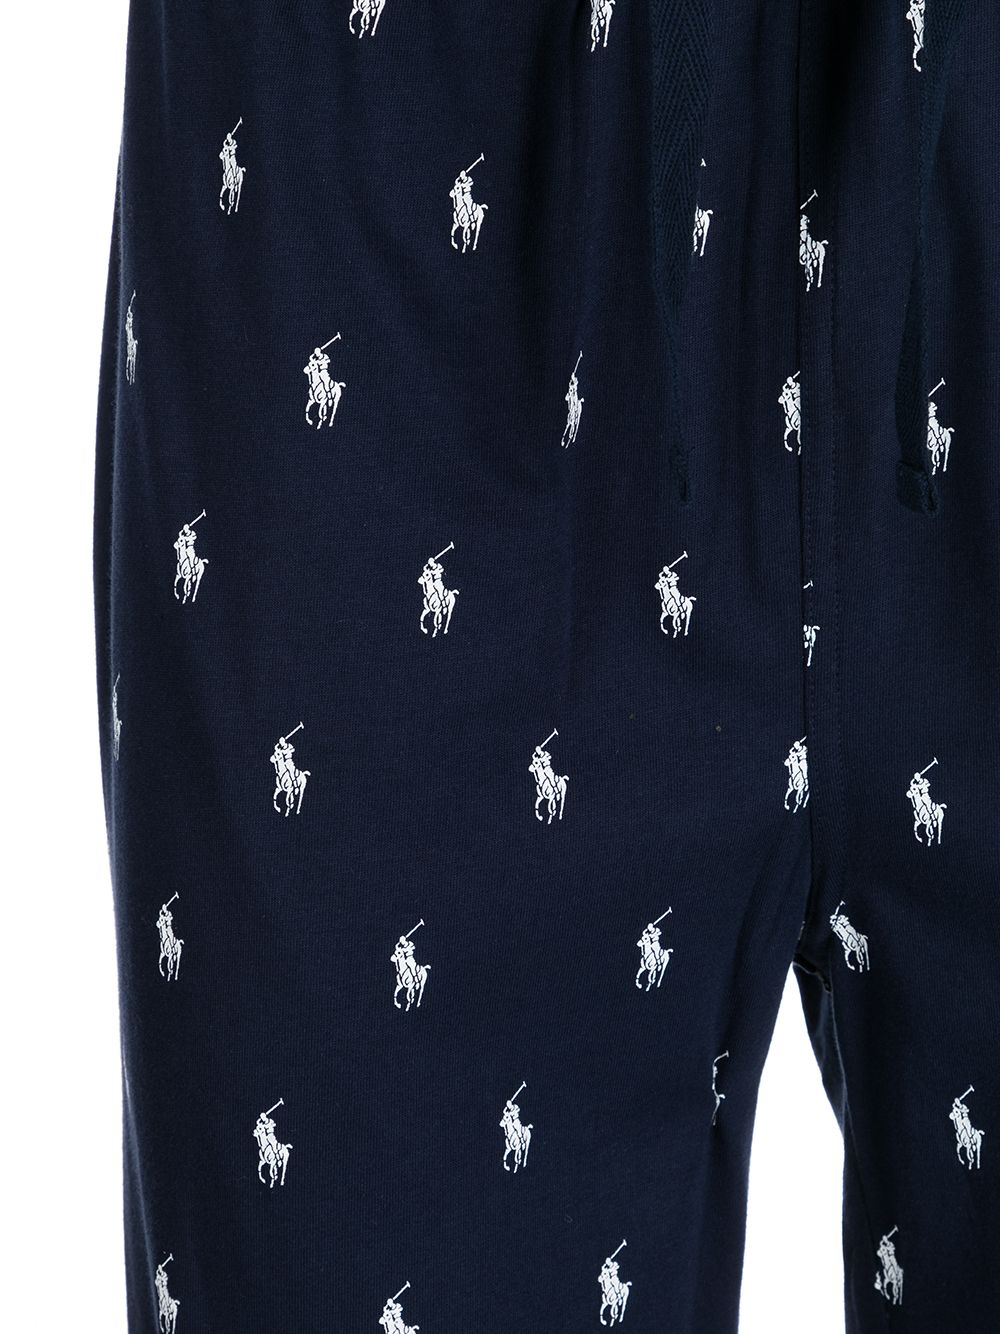 Polo Ralph Lauren all-over Pony Print Trousers - Farfetch